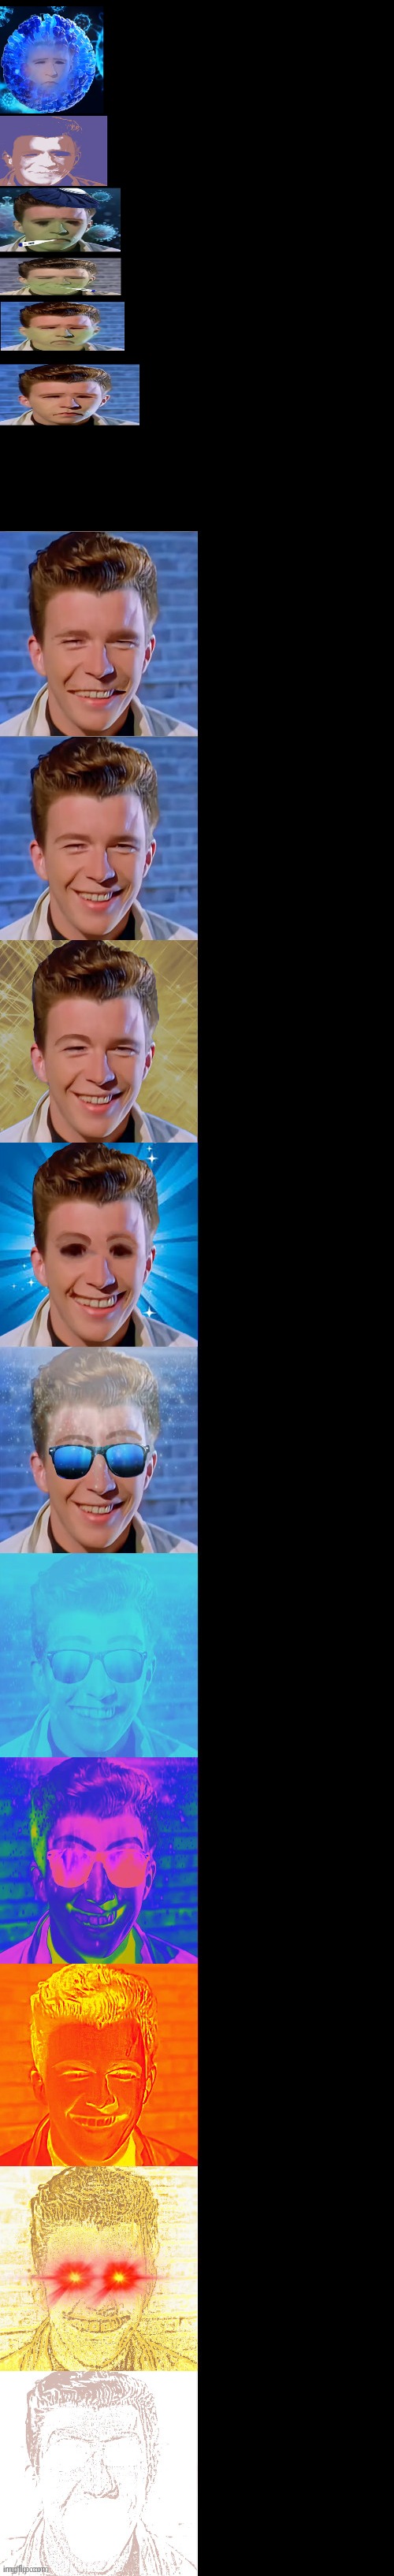 Rick Astley Becoming Sick To Canny Blank Meme Template